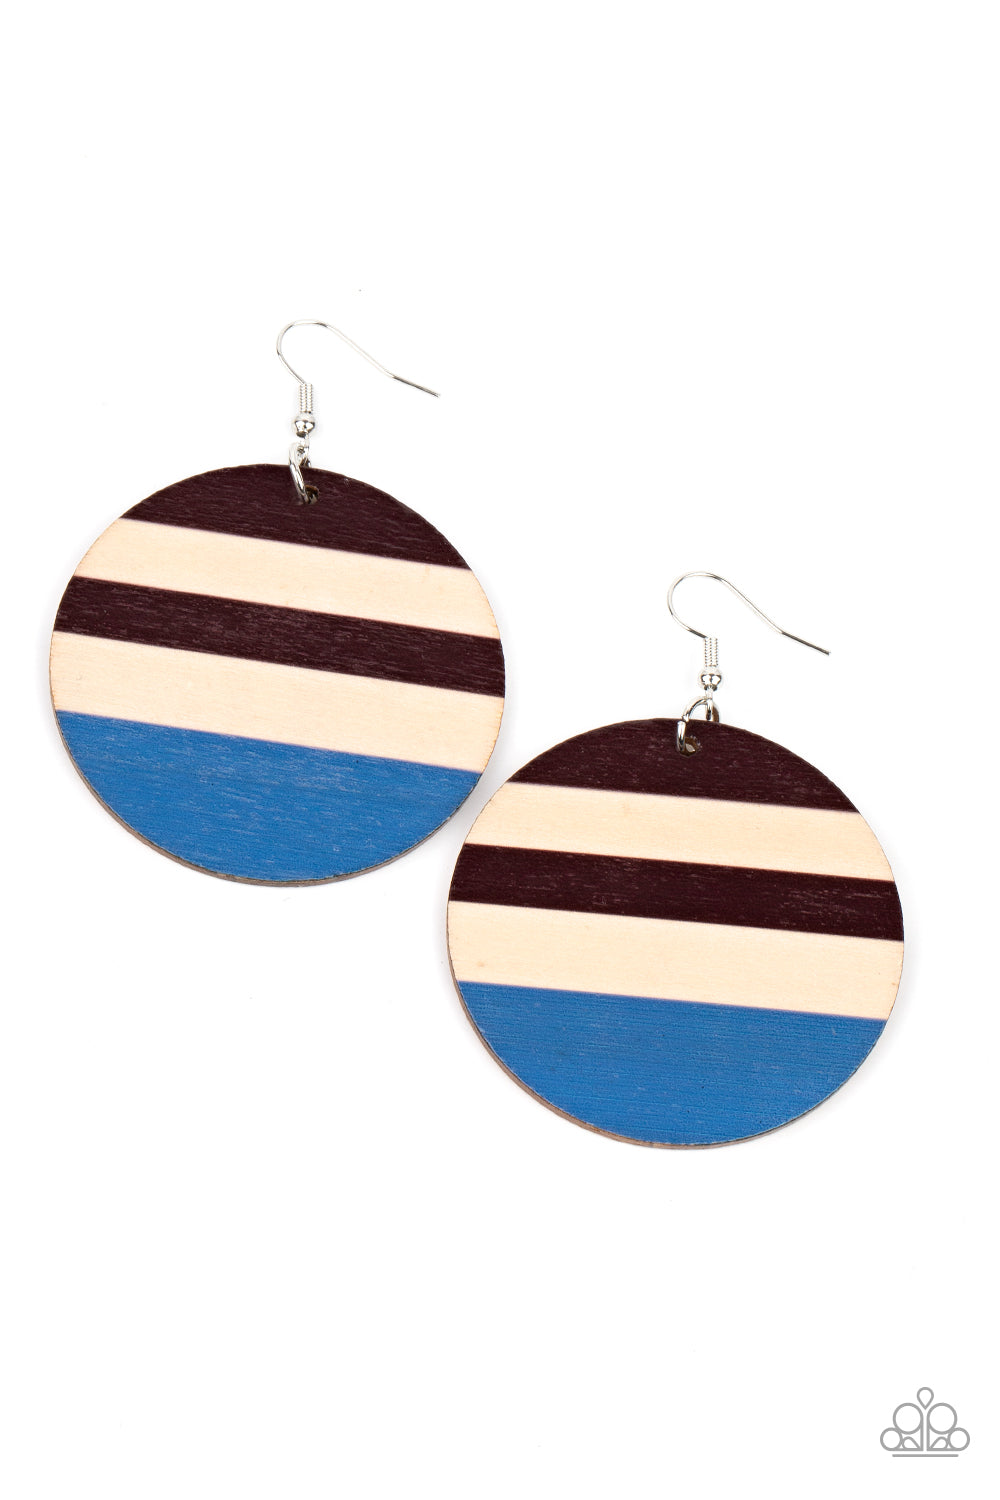 A shiny wooden disc is striped in purplish-brown and French Blue accents. Nickel-free and lead free earrings with fish hooks.